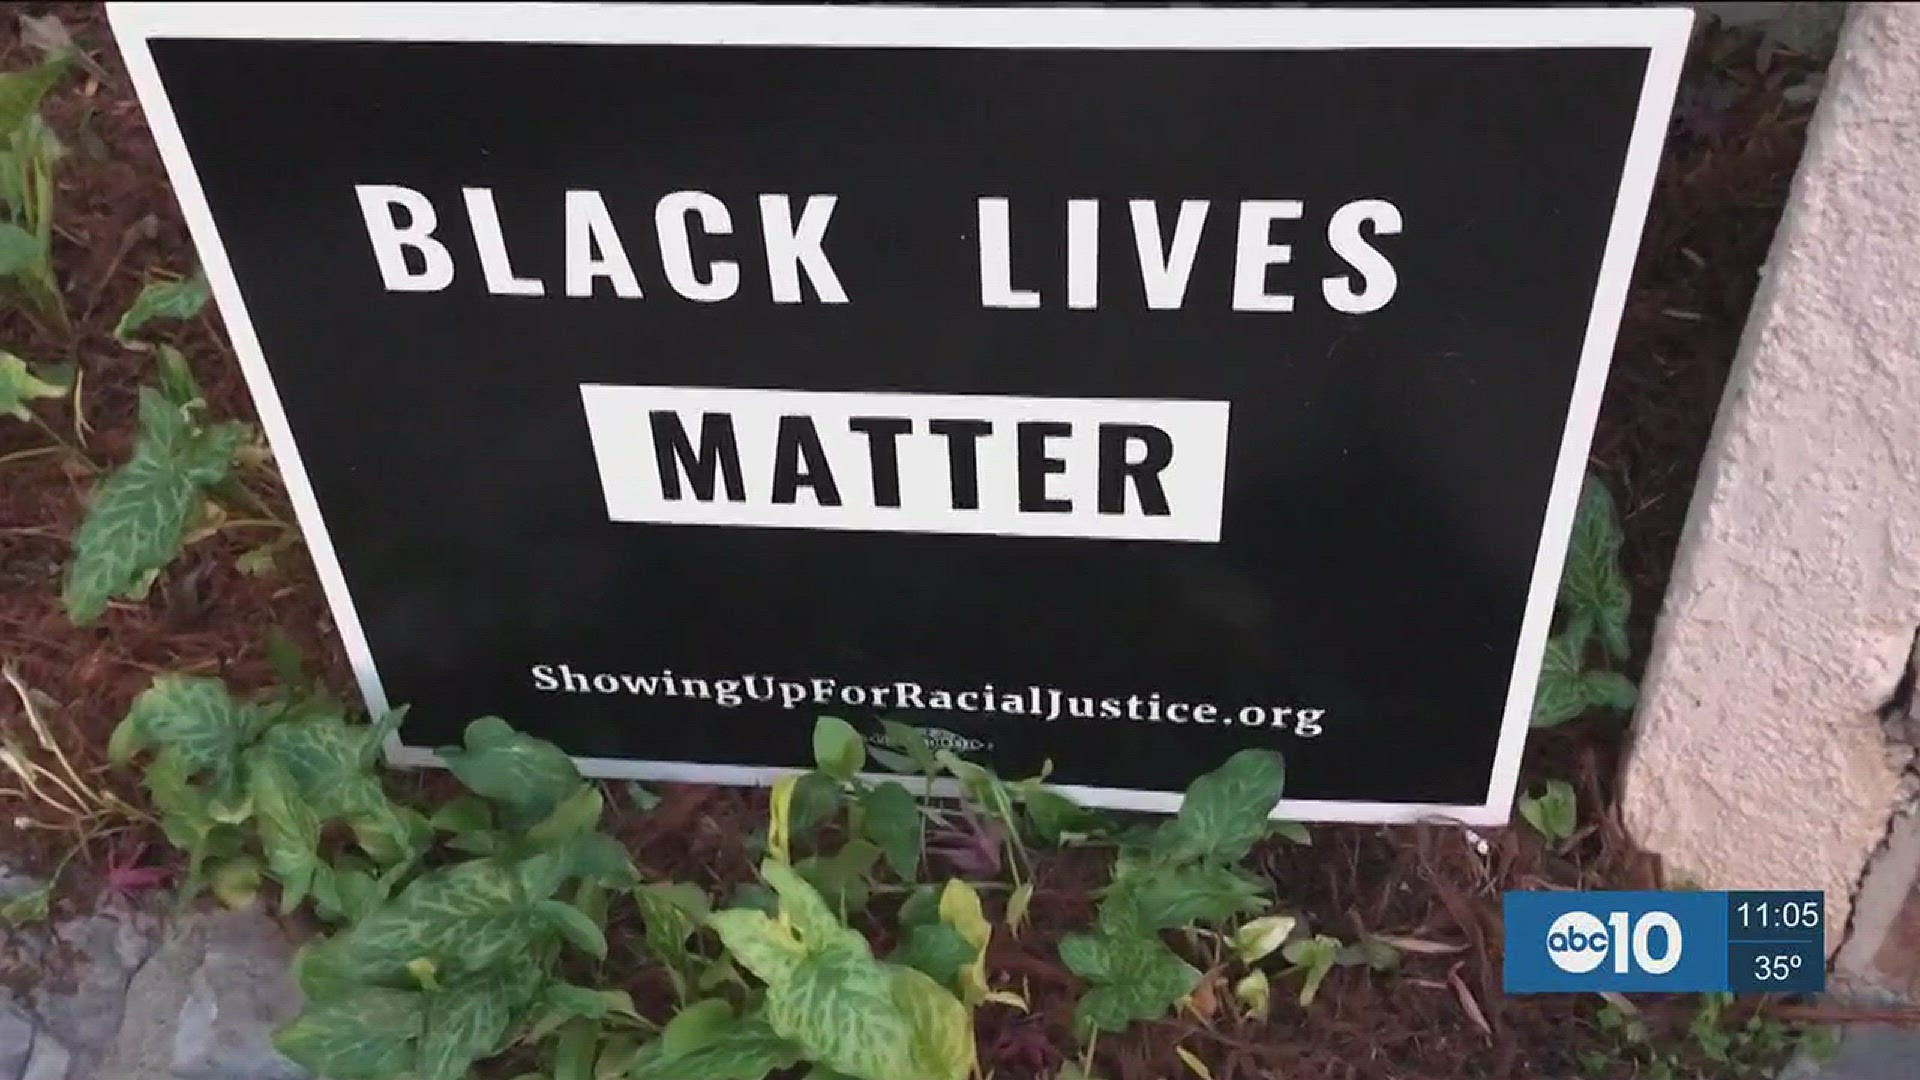 A woman who has put Black Lives Matter signs in her front yard says she won't back down after vandalism. (Dec. 19, 2016)